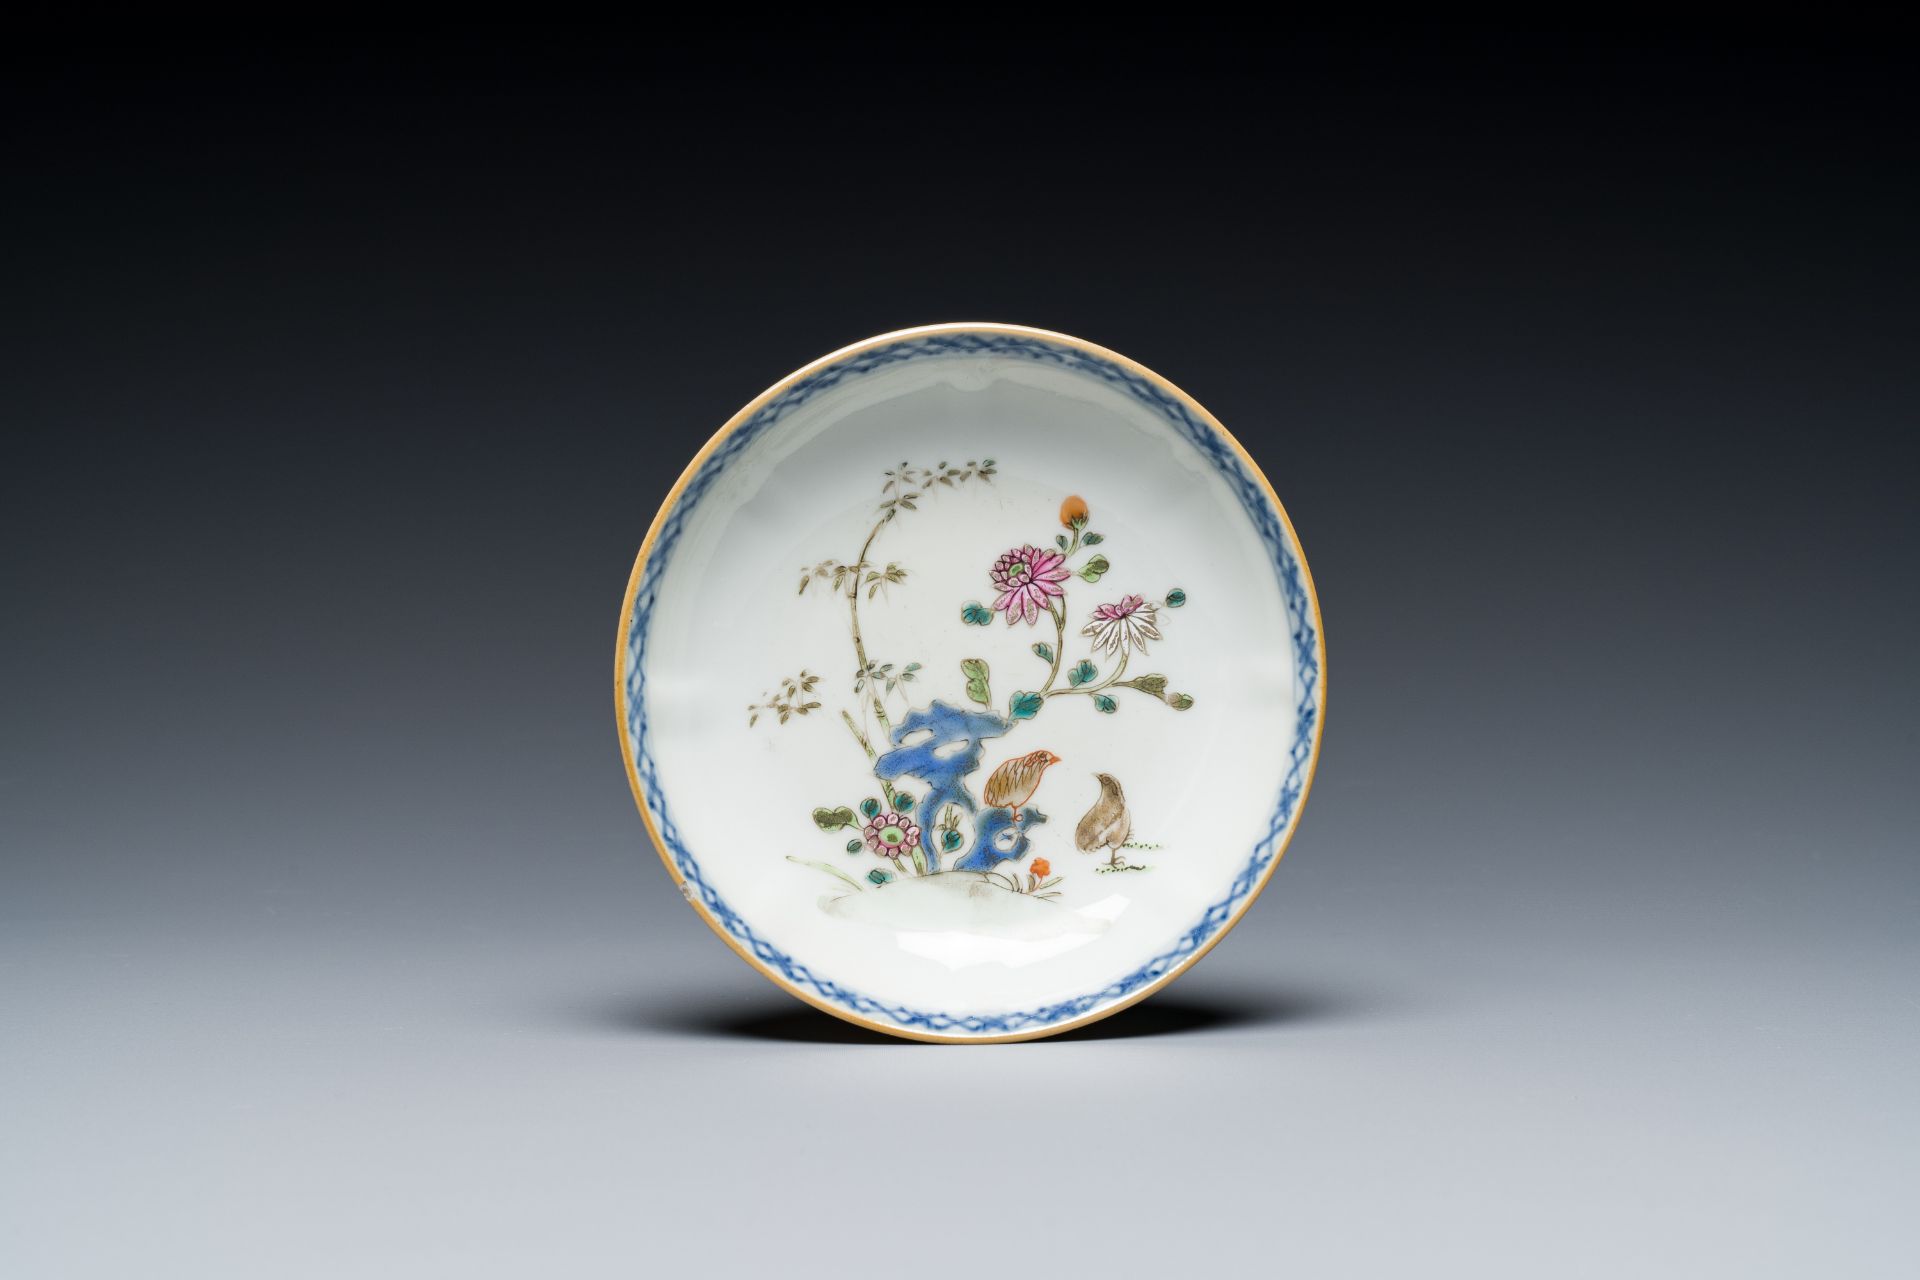 A varied collection of Chinese porcelain, 18/19th C. - Image 8 of 9